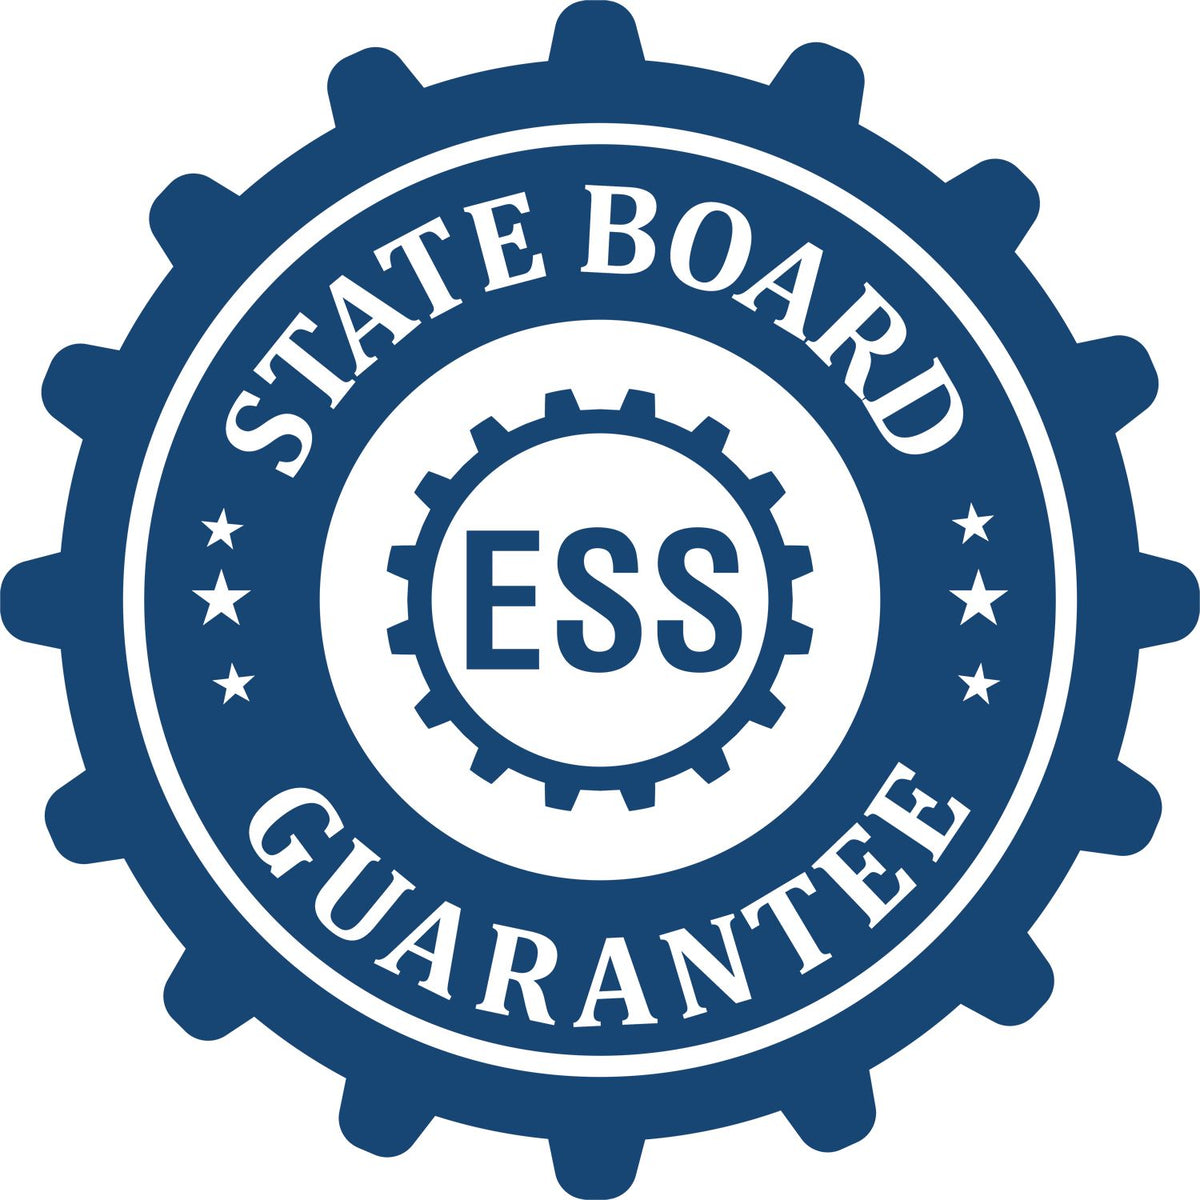 An emblem in a gear shape illustrating a state board guarantee for the Hybrid South Carolina Geologist Seal